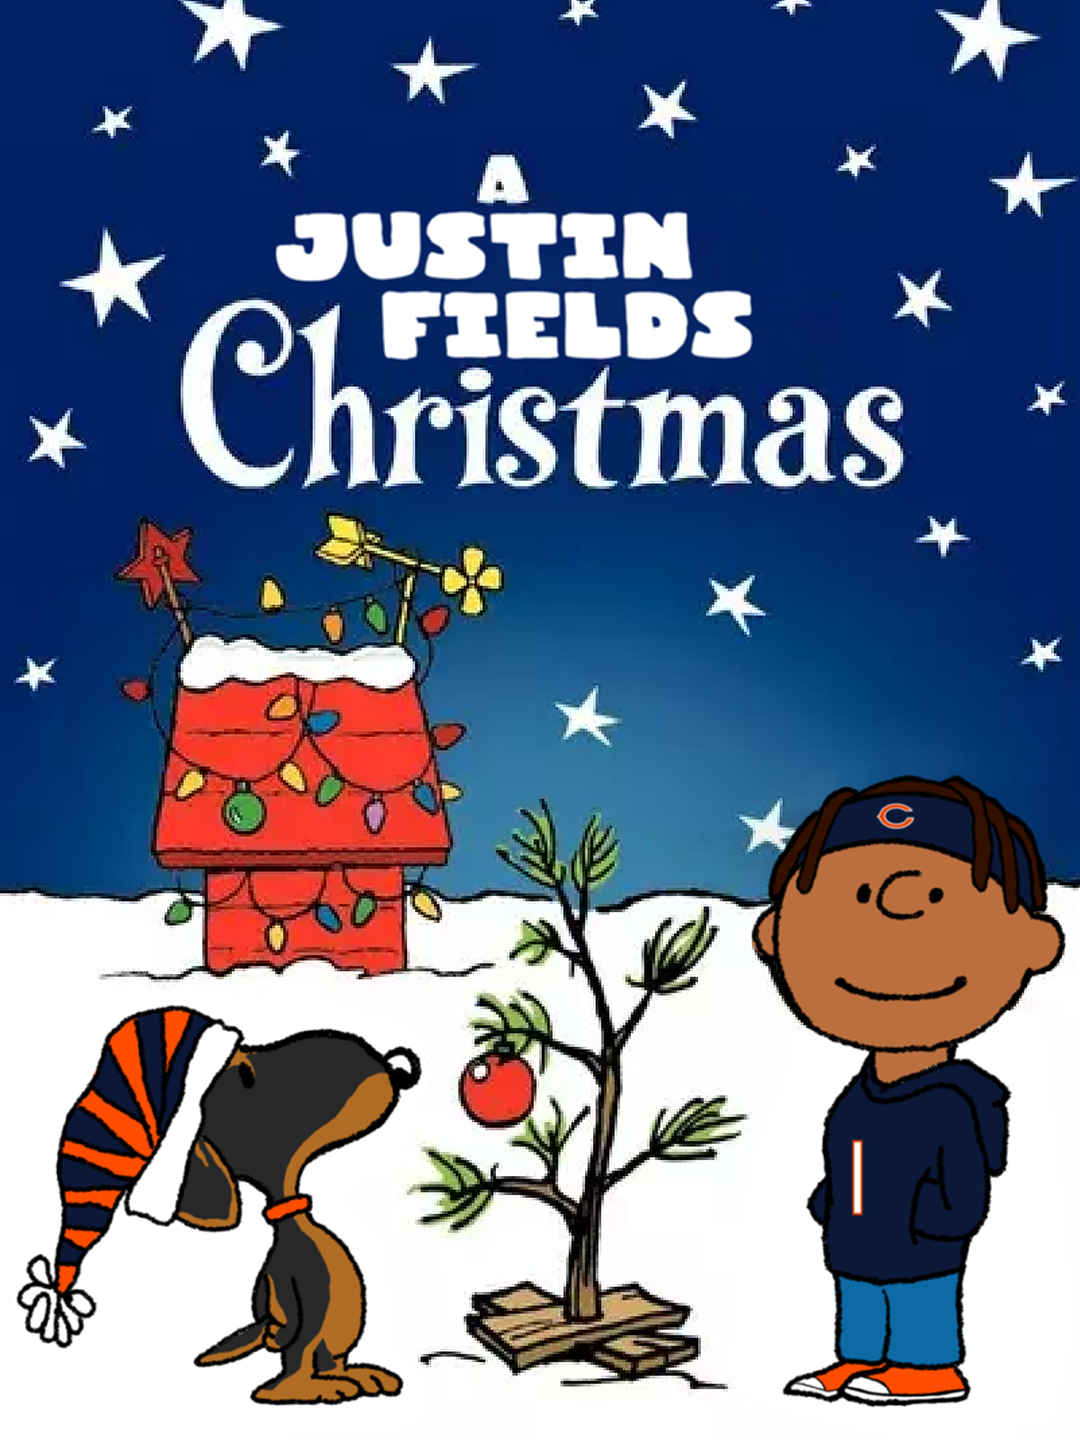 A-JustinFields-Christmas-TW-3x4.png